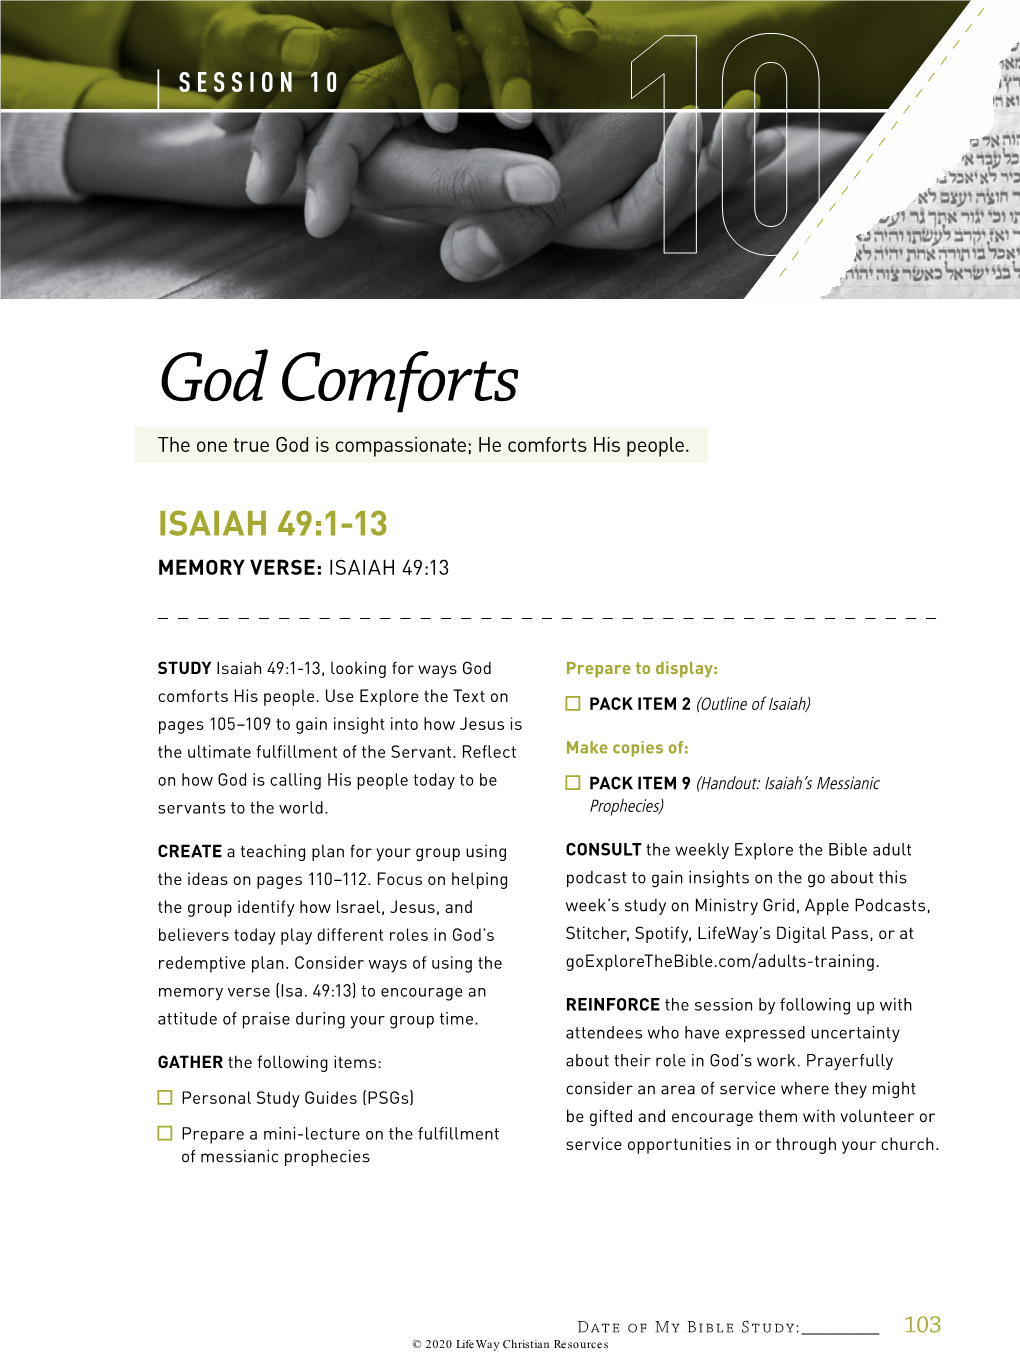 God Comforts the One True God Is Compassionate; He Comforts His People